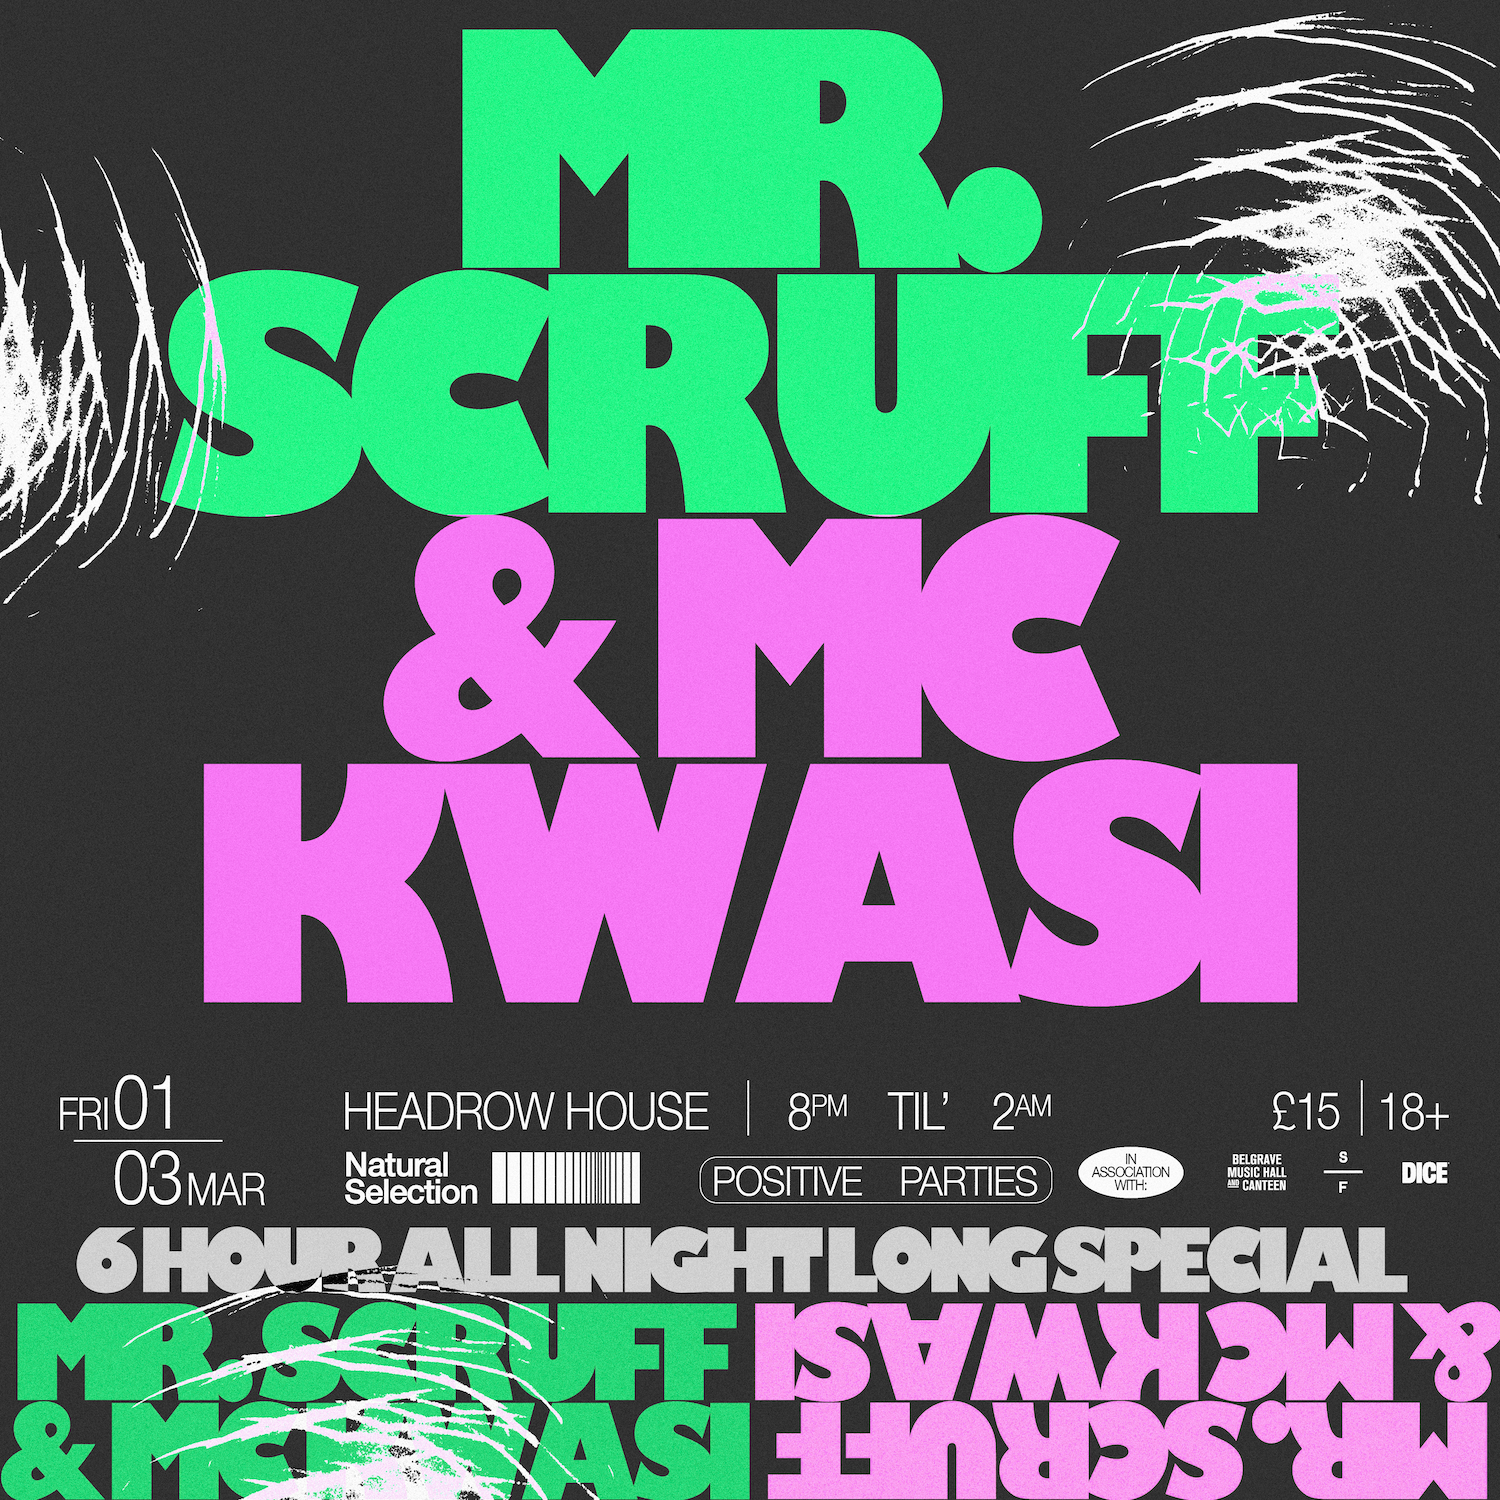 Mr Scruff & MC Kwasi (6 Hour All Night Long Special) - フライヤー表